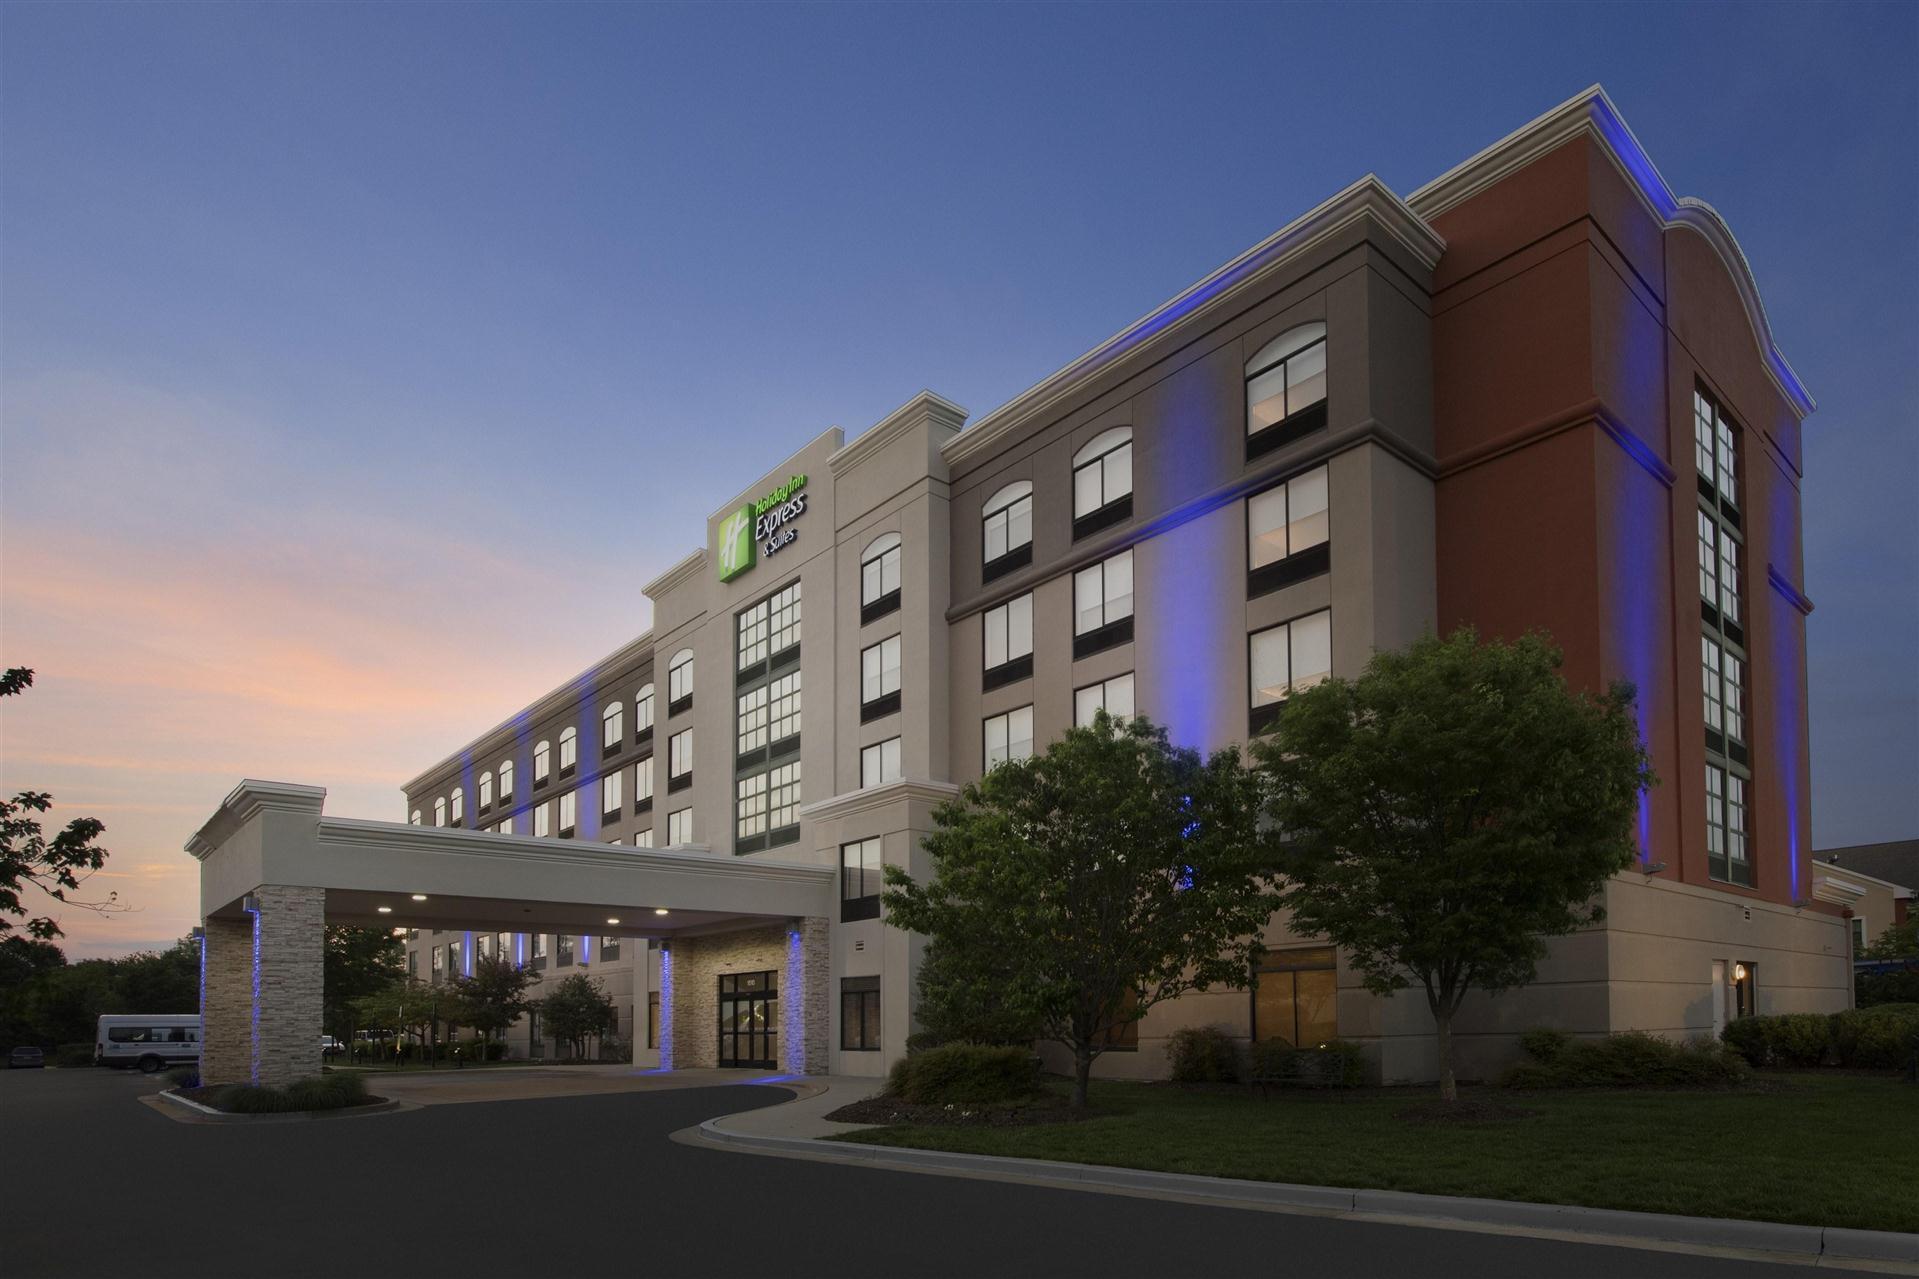 Holiday Inn Express & Suites Baltimore - BWI Airport North in Linthicum, MD